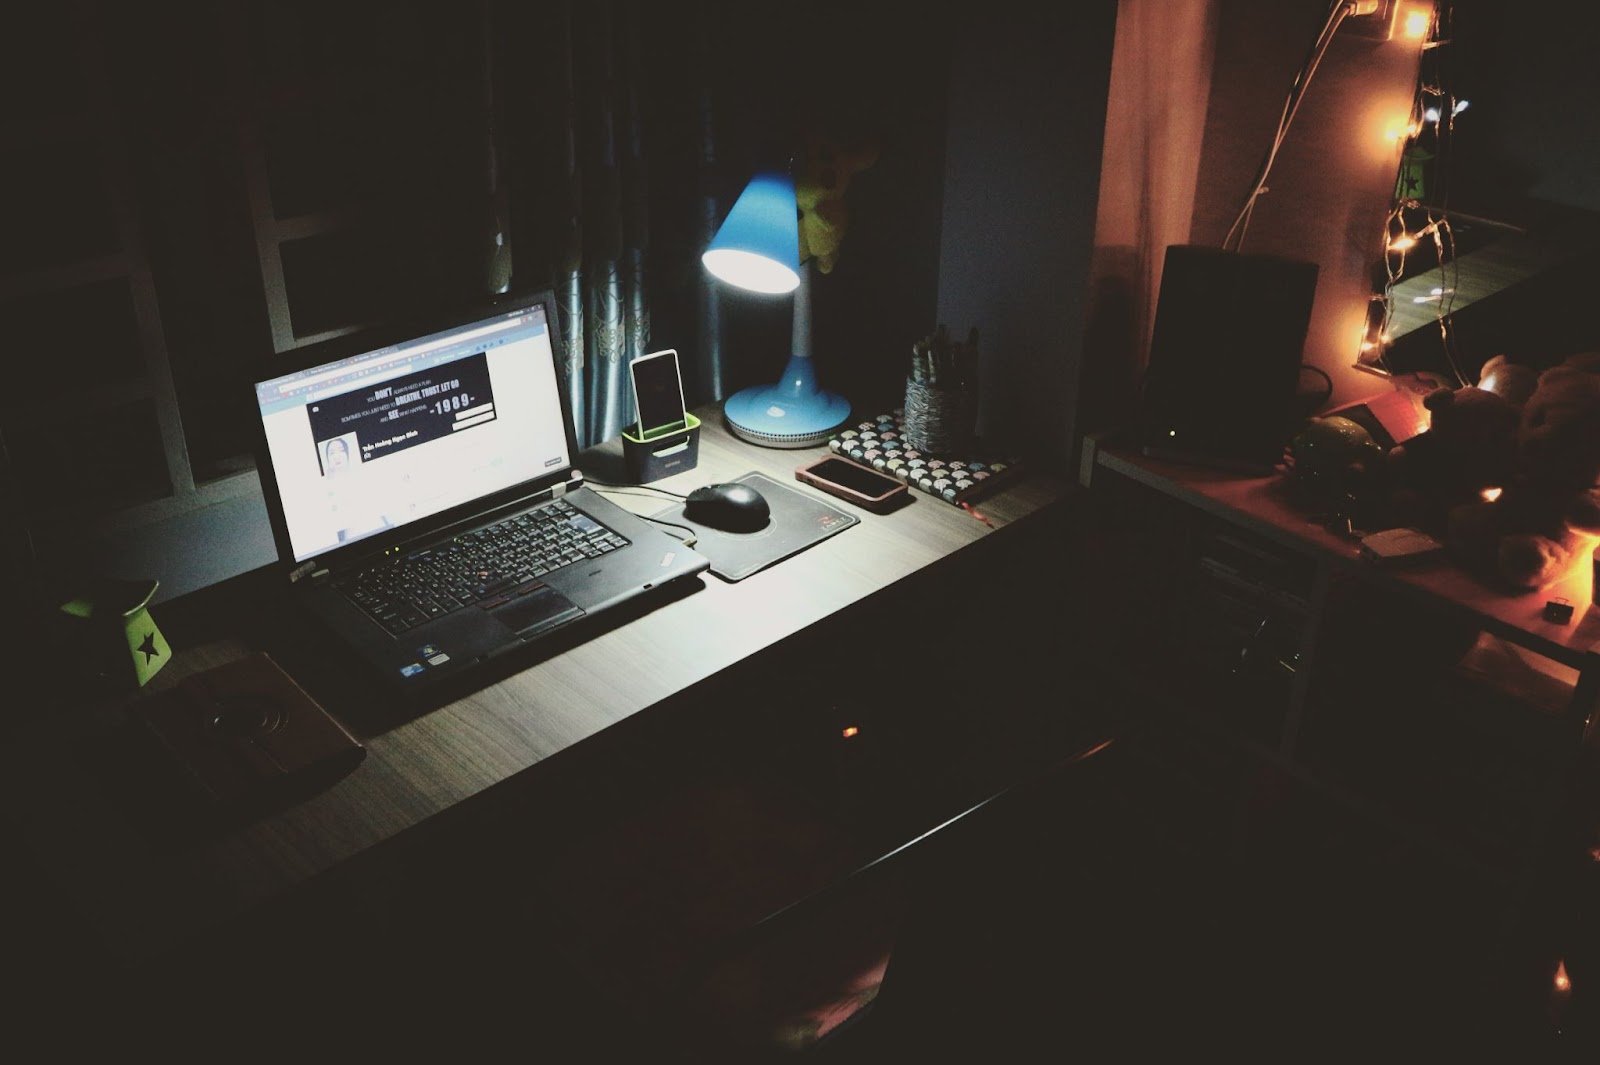 A laptop and a phone on top of a desk, and a lamp shining on them